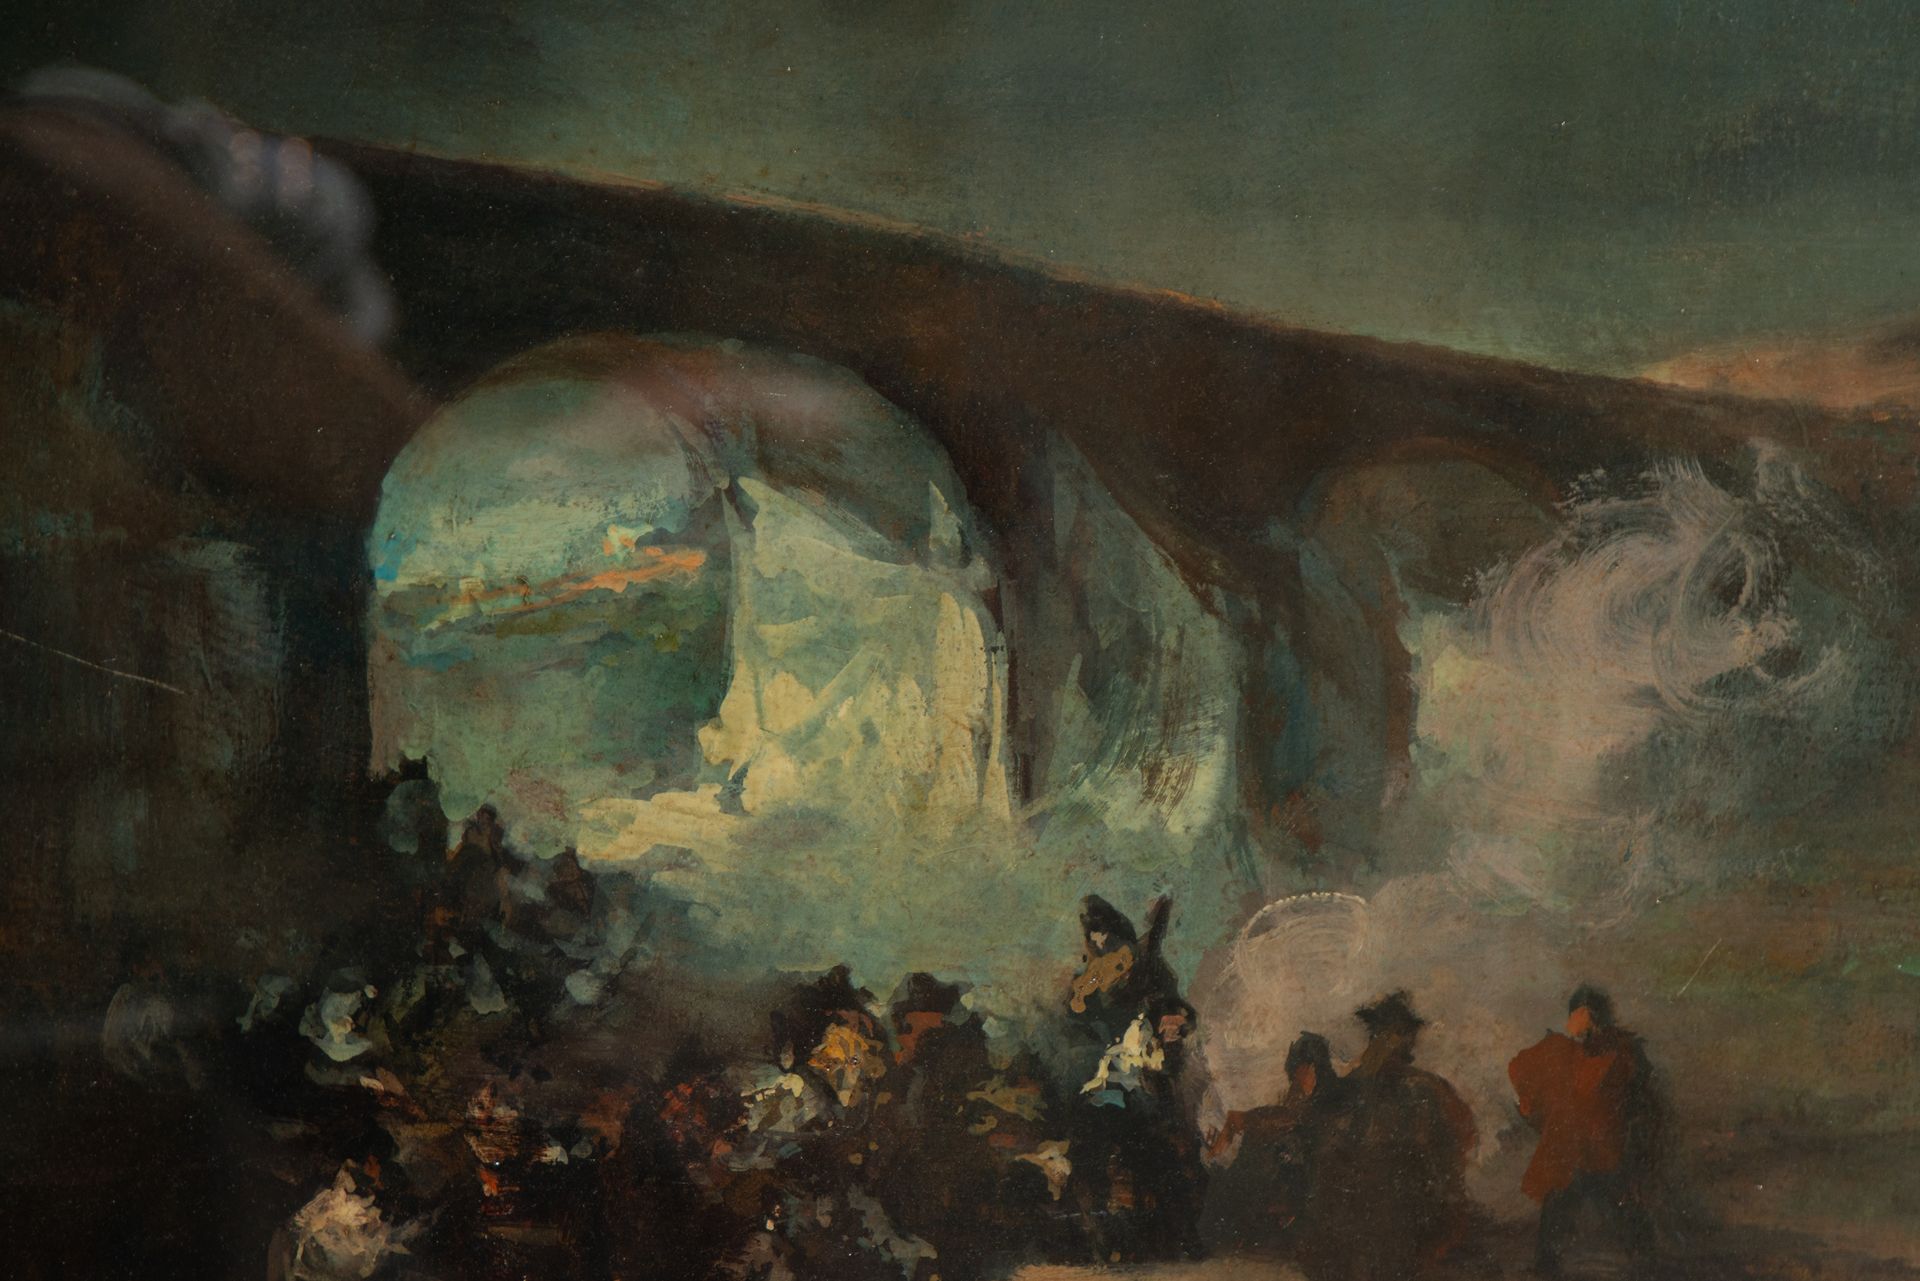 Bandits in the Cave, signed and certified Eugenio Lucas Vilaamil, 1861, 19th century Spanish school - Bild 3 aus 10